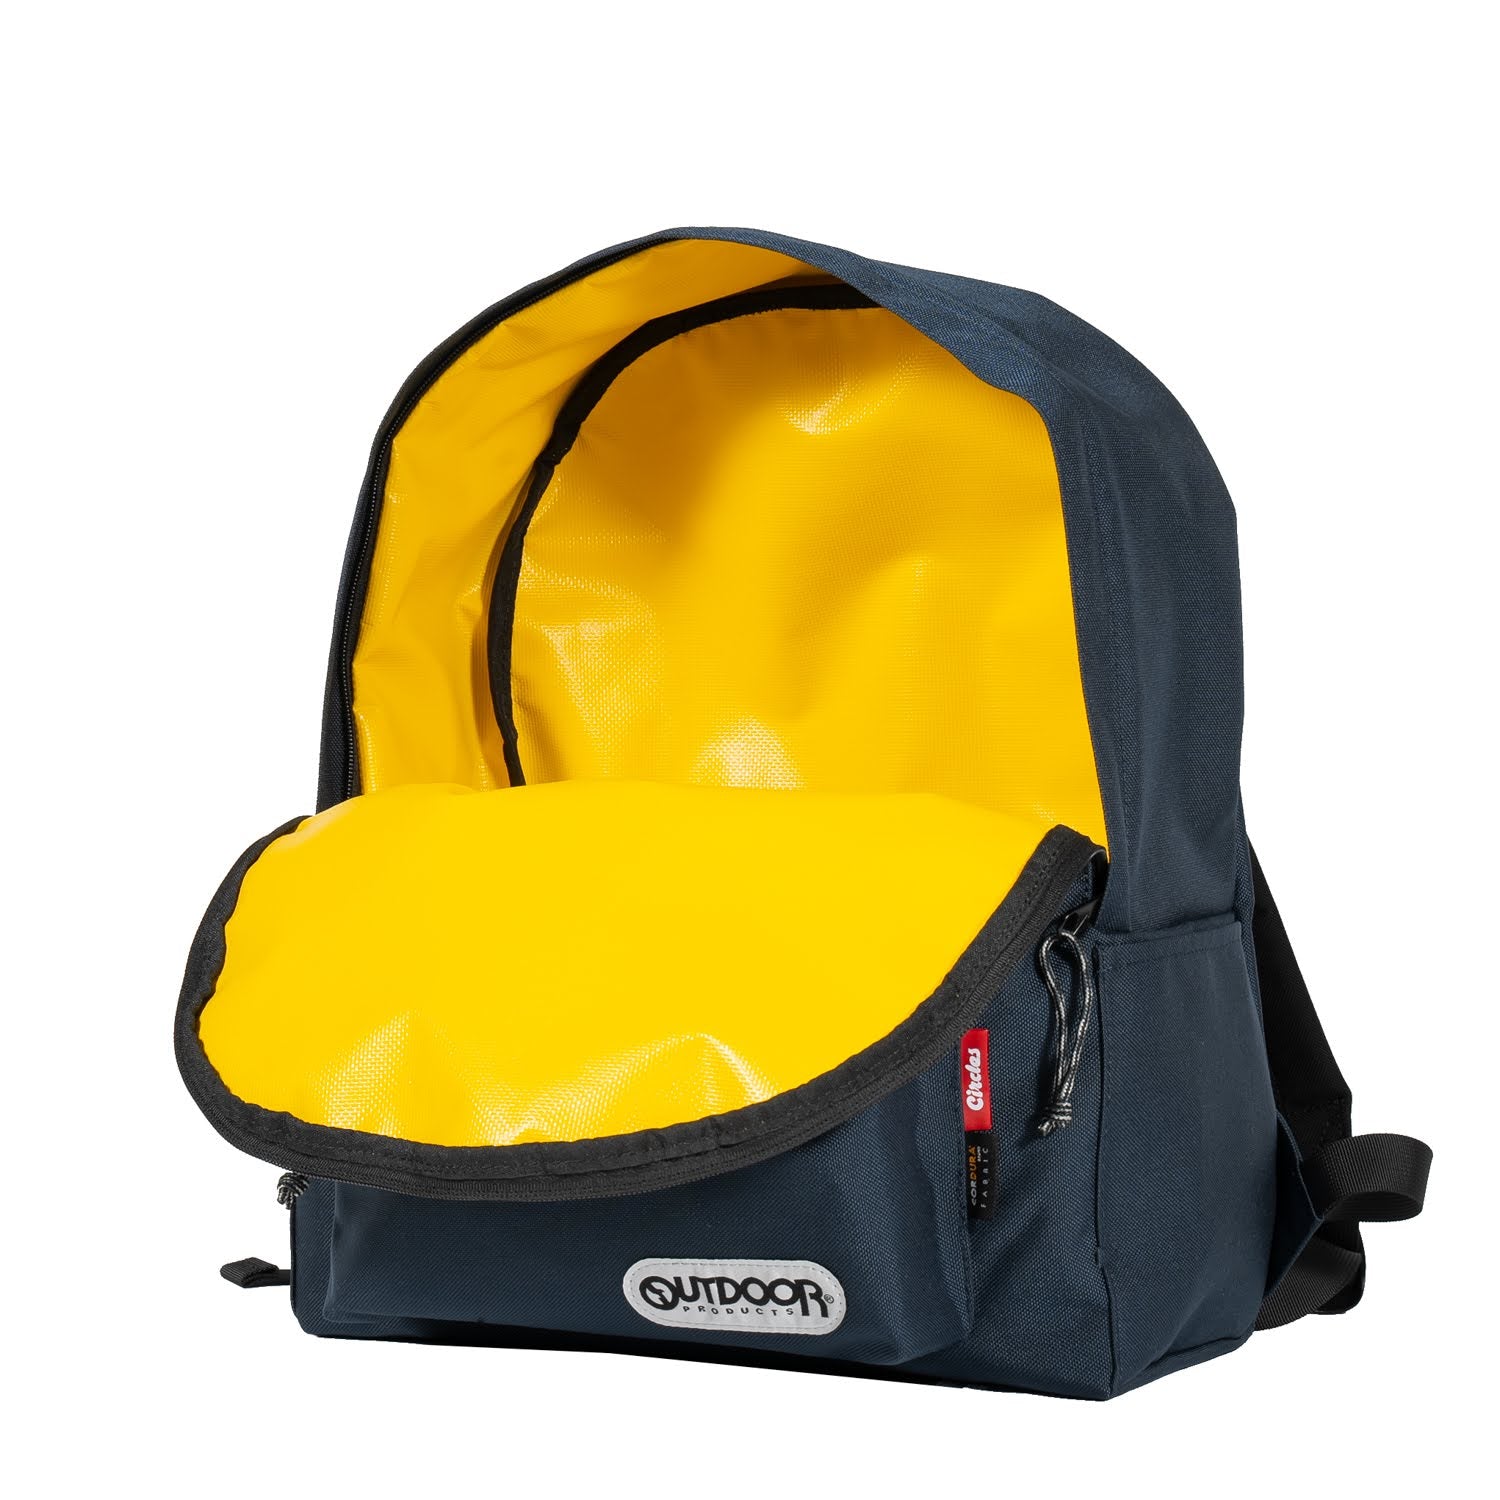 OUTDOOR PRODUCTS Circles Day Pack